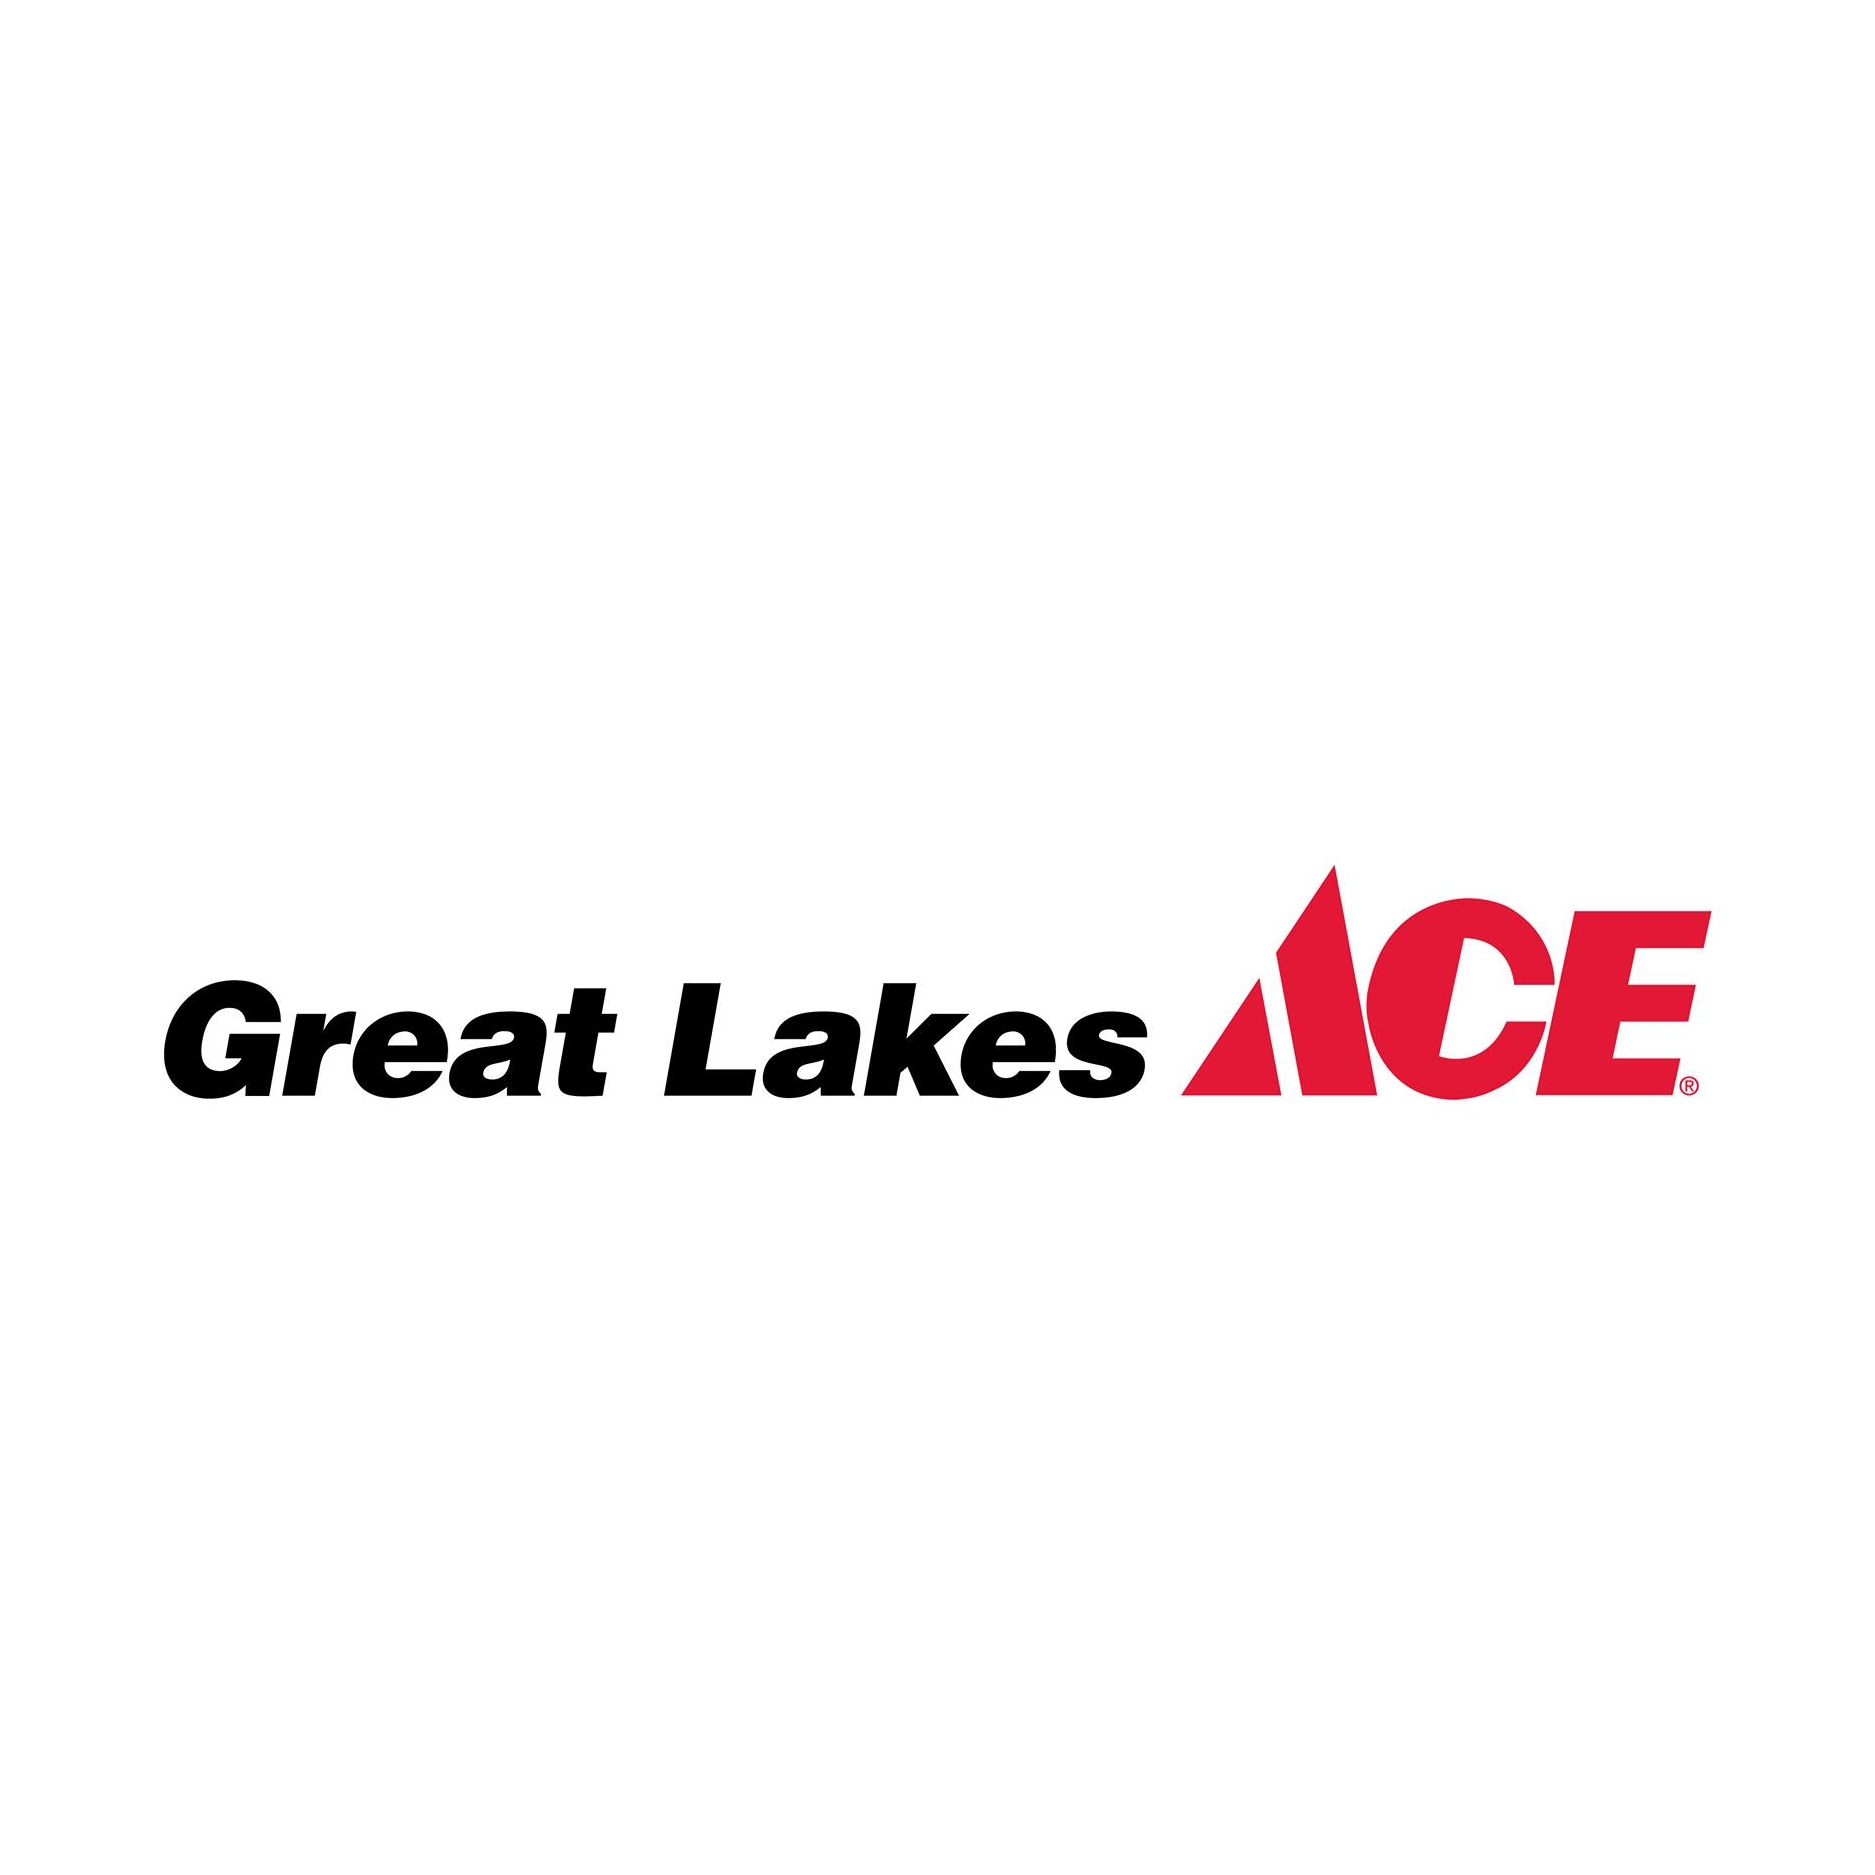 Great Lakes Ace